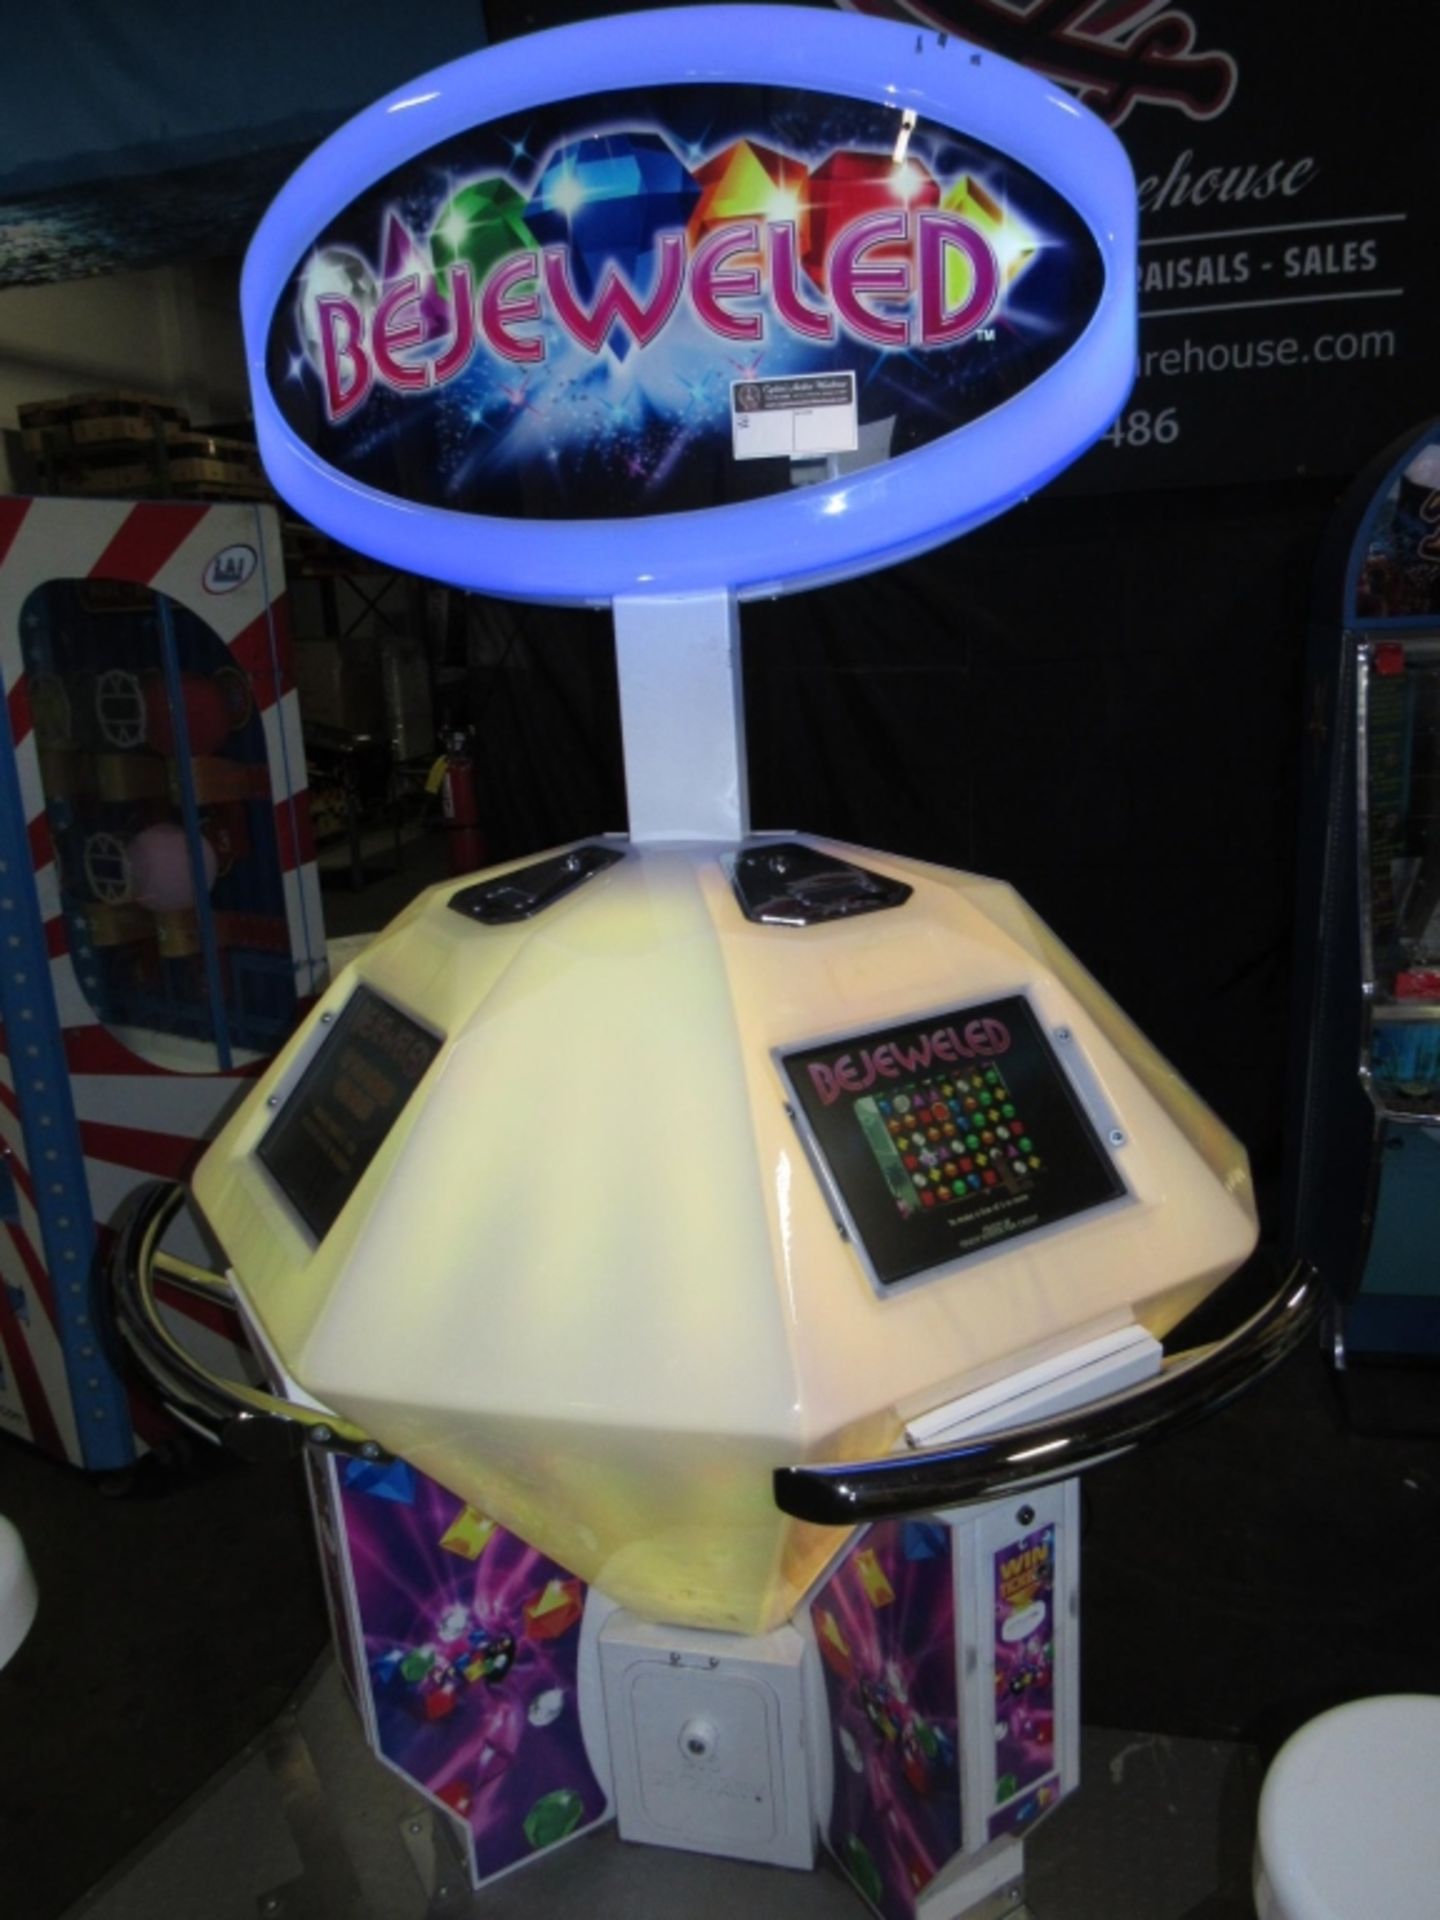 BEJEWELED UPRIGHT DELUXE ARCADE GAME - Image 3 of 10